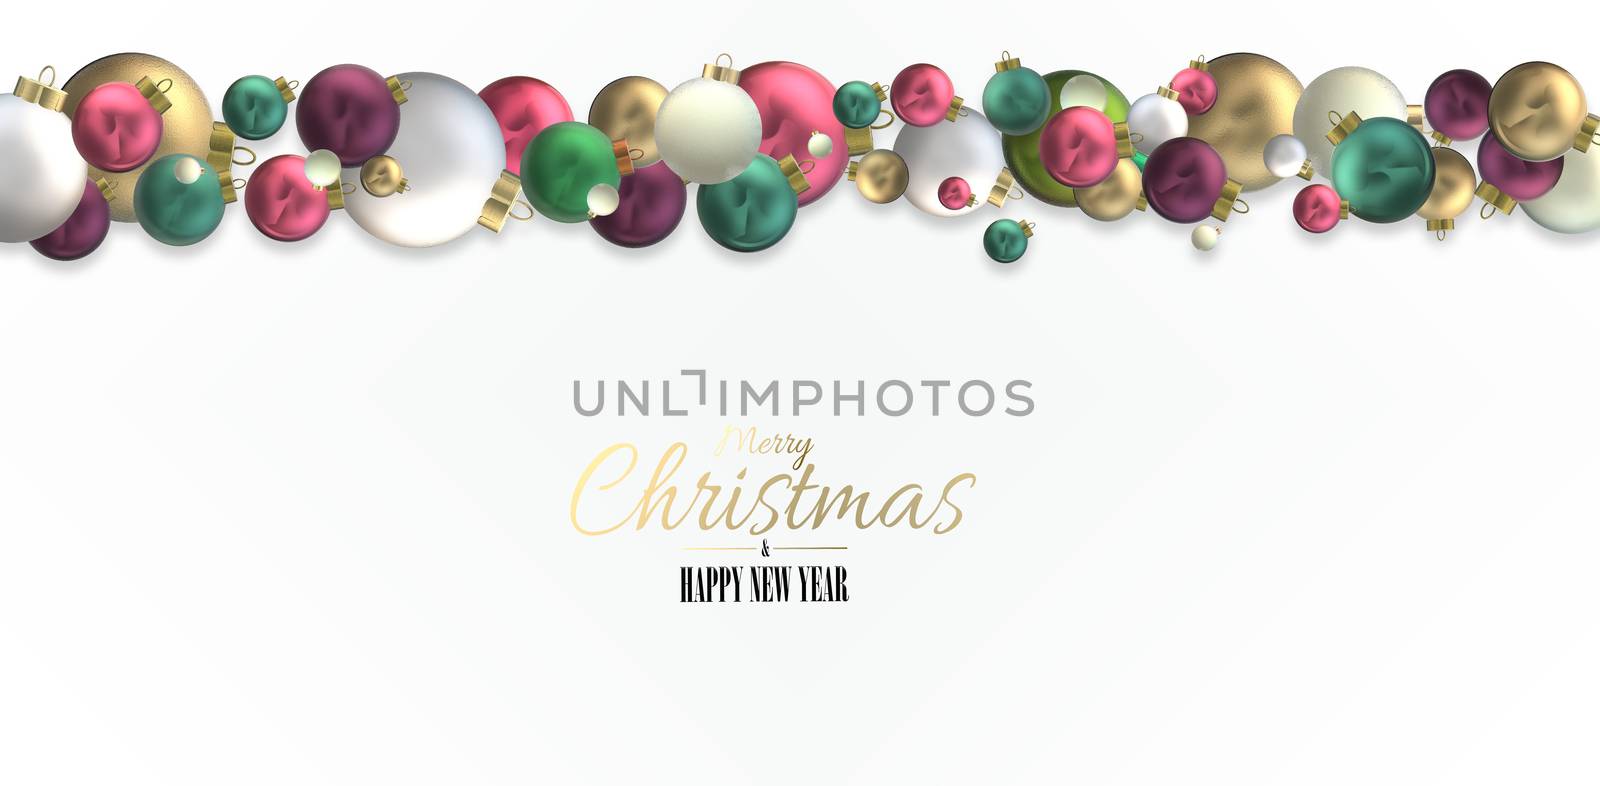 Horizontal Xmas background banner on white with Christmas symbol 3D realistic shiny red green gold balls on white background. Text Merry Christmas Happy New Year. Holiday festive design in 3D render